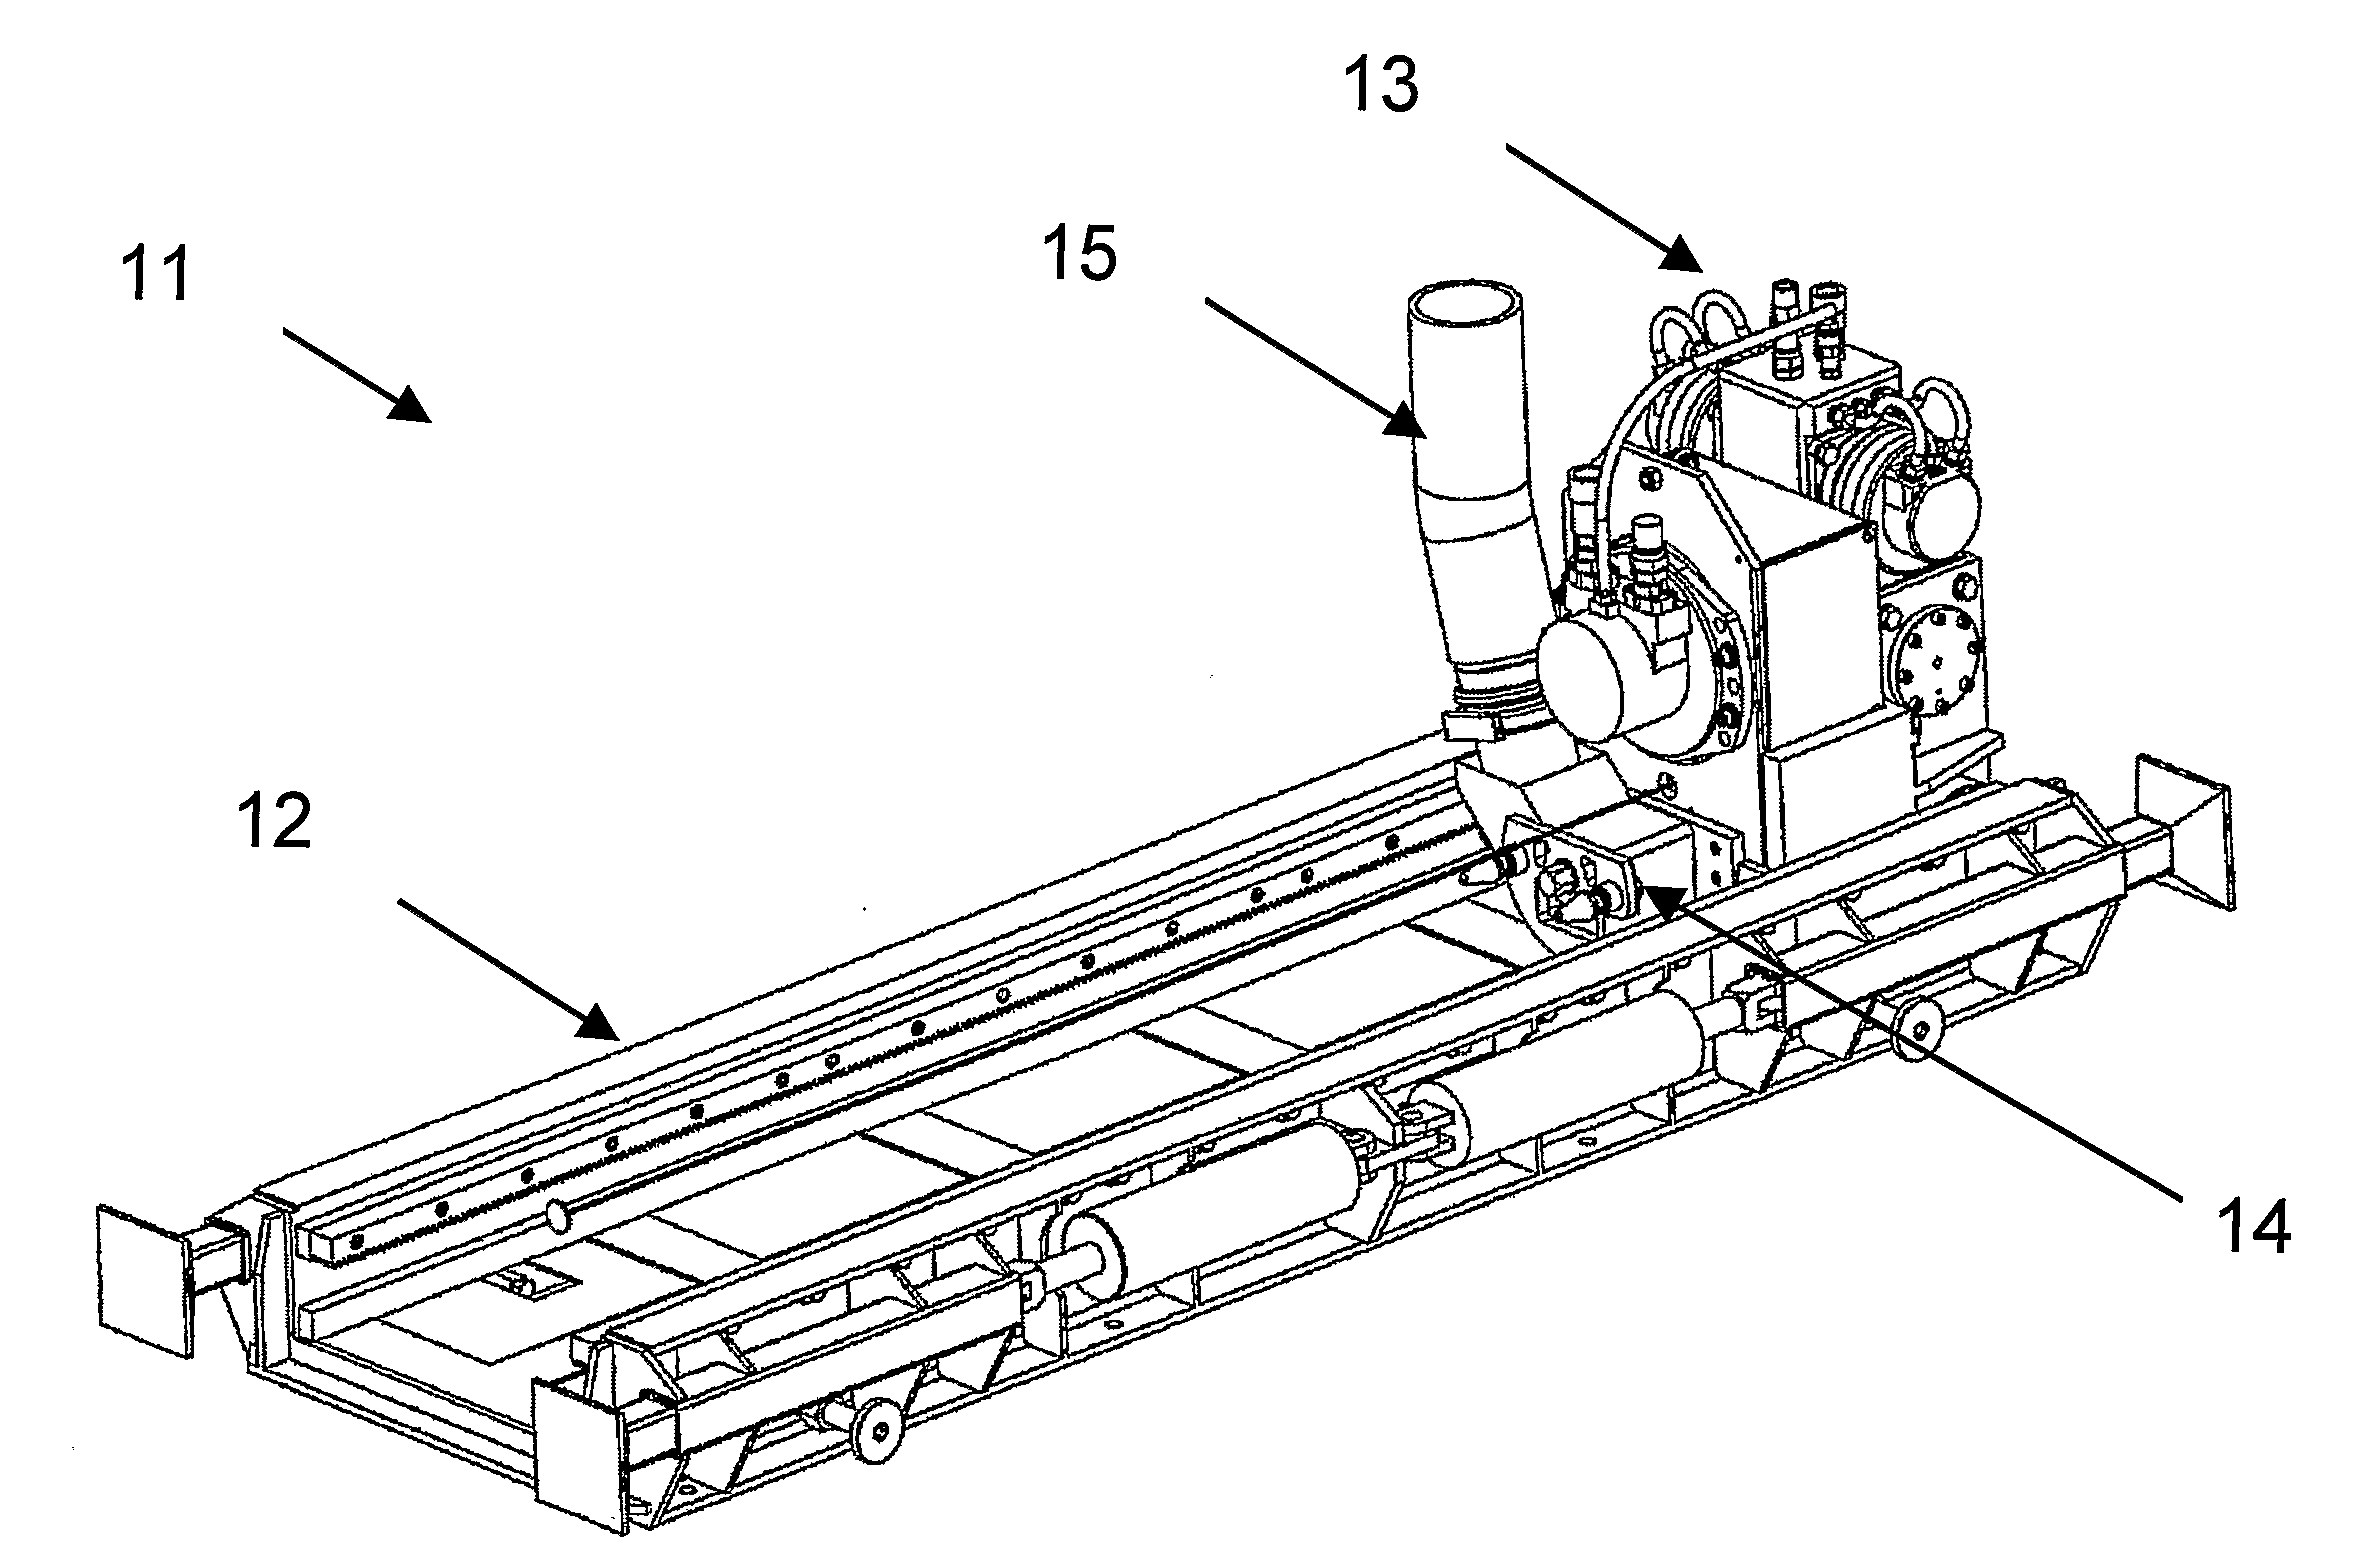 Microtunnelling system and apparatus